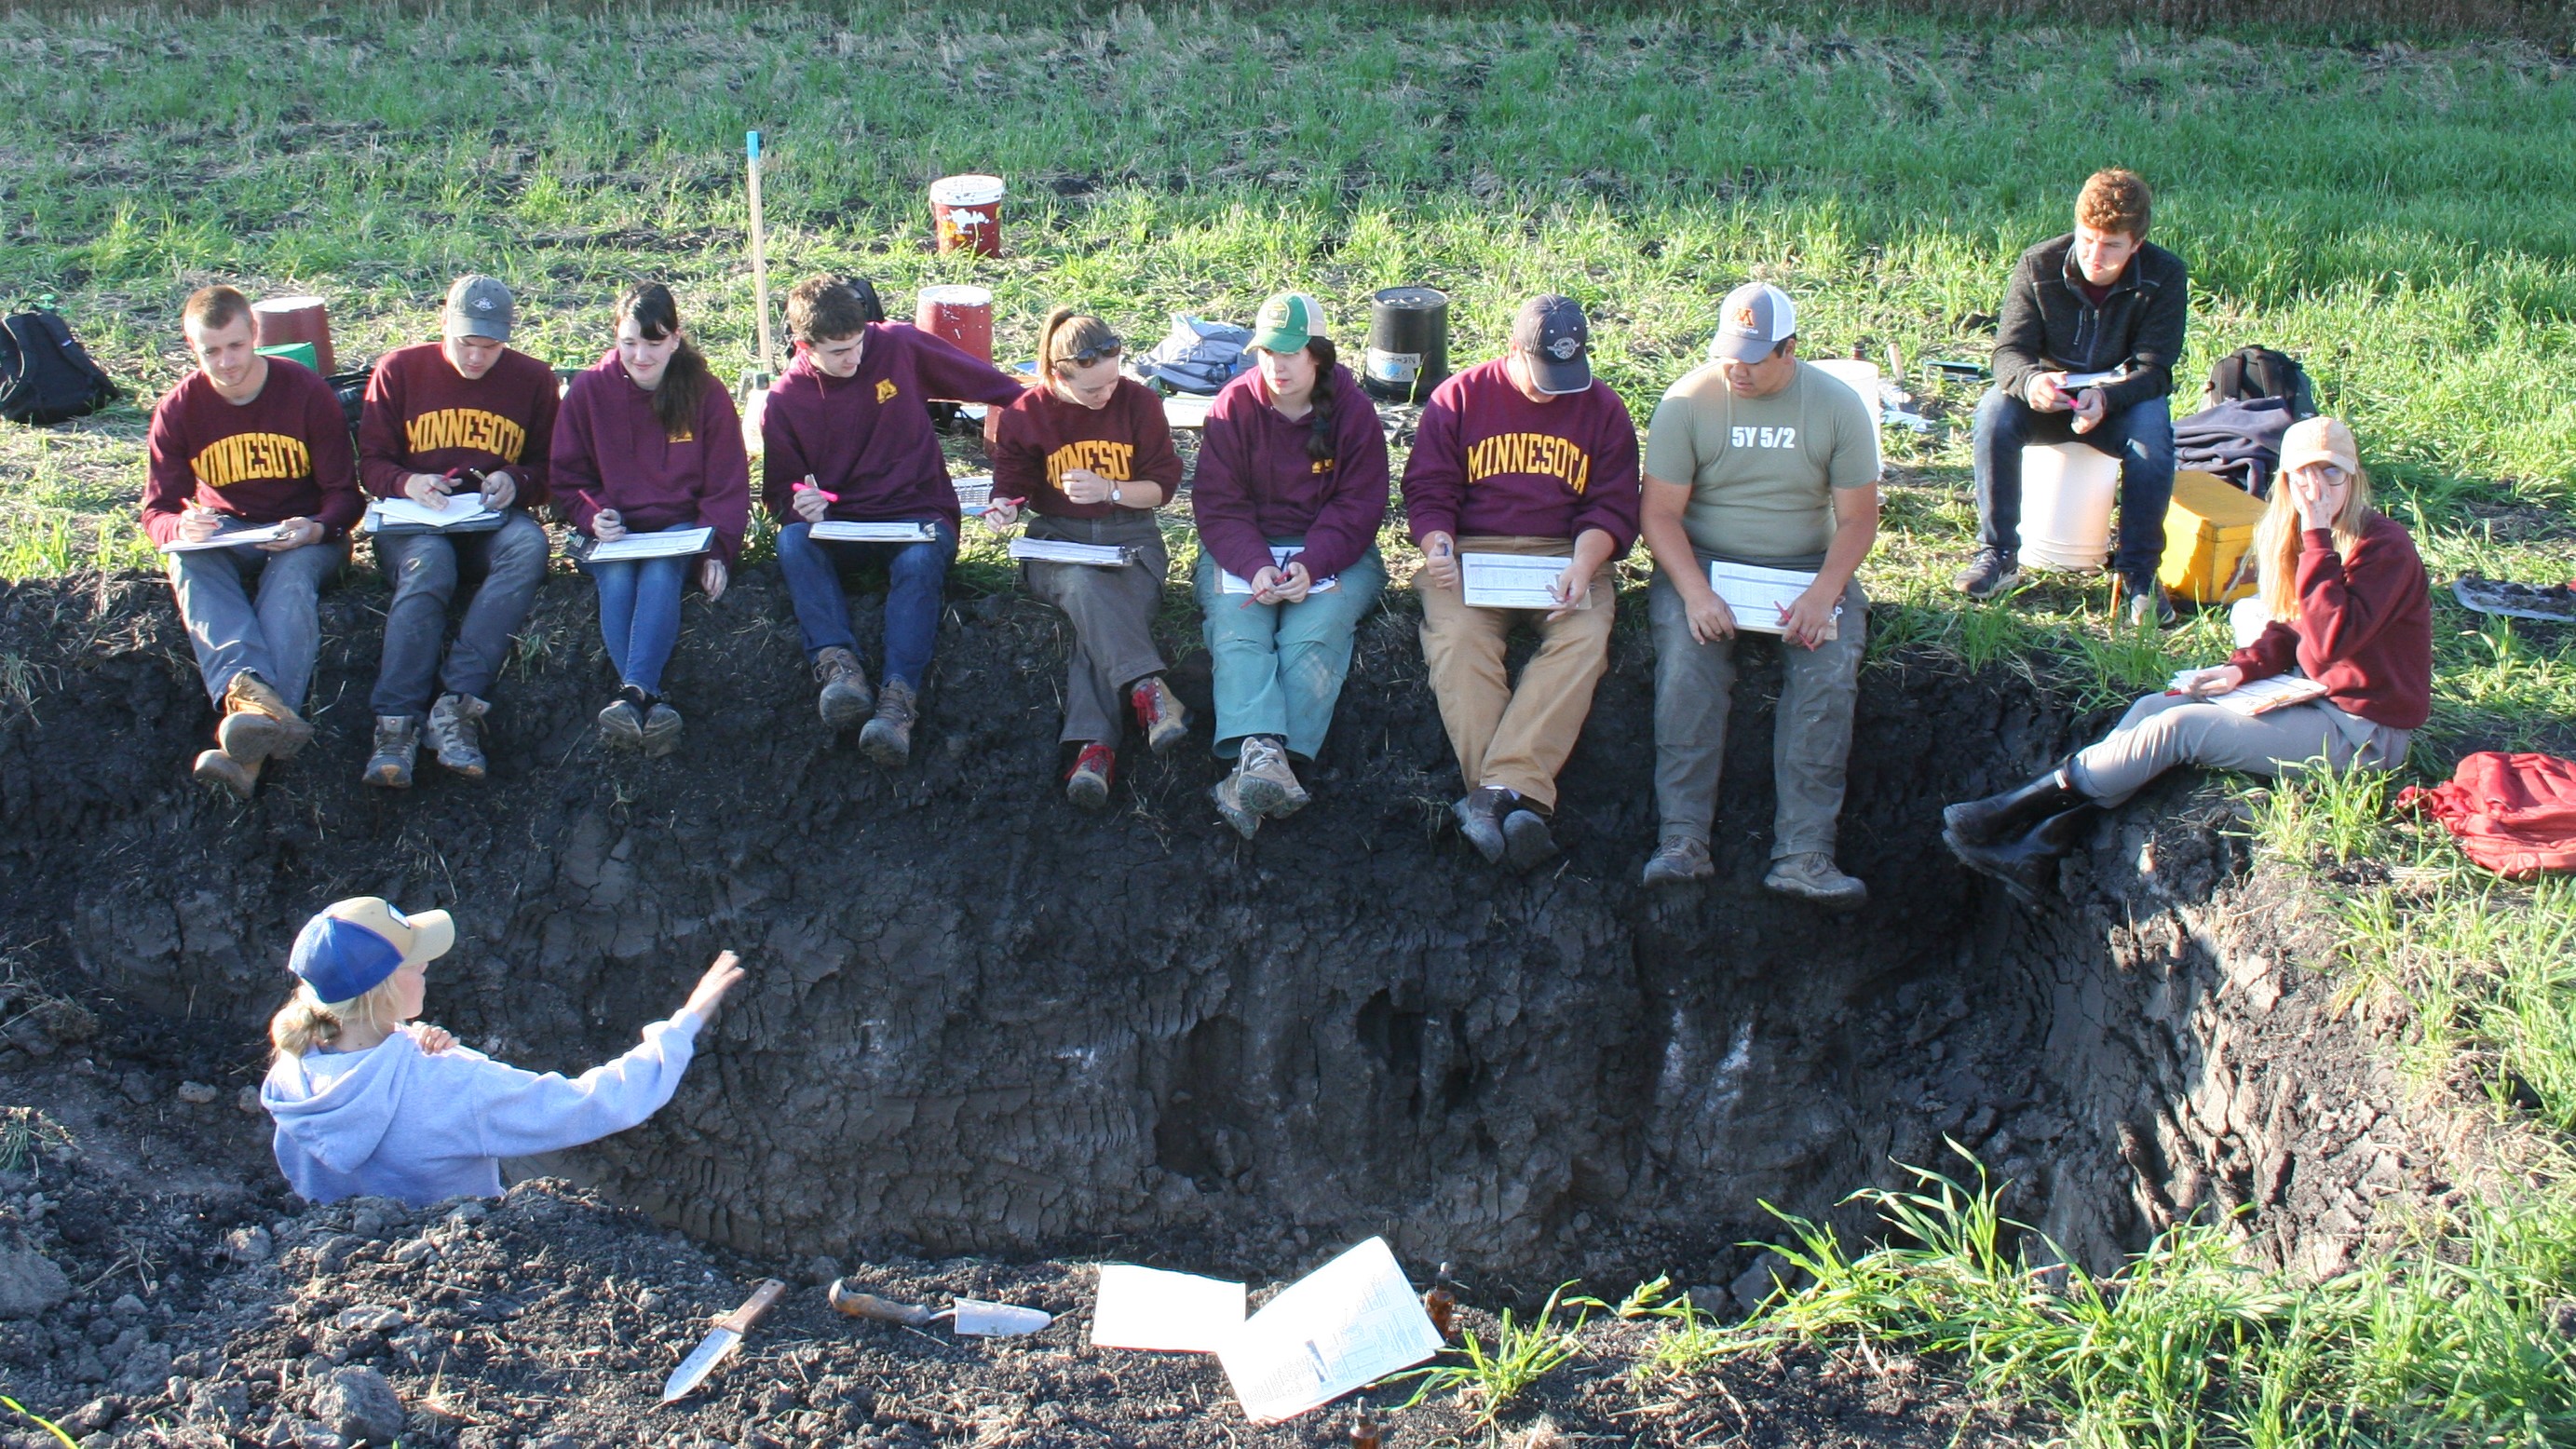 A photo of Megan Andersen, bottom left, in a soil pit surrounded by UMN soil judging students